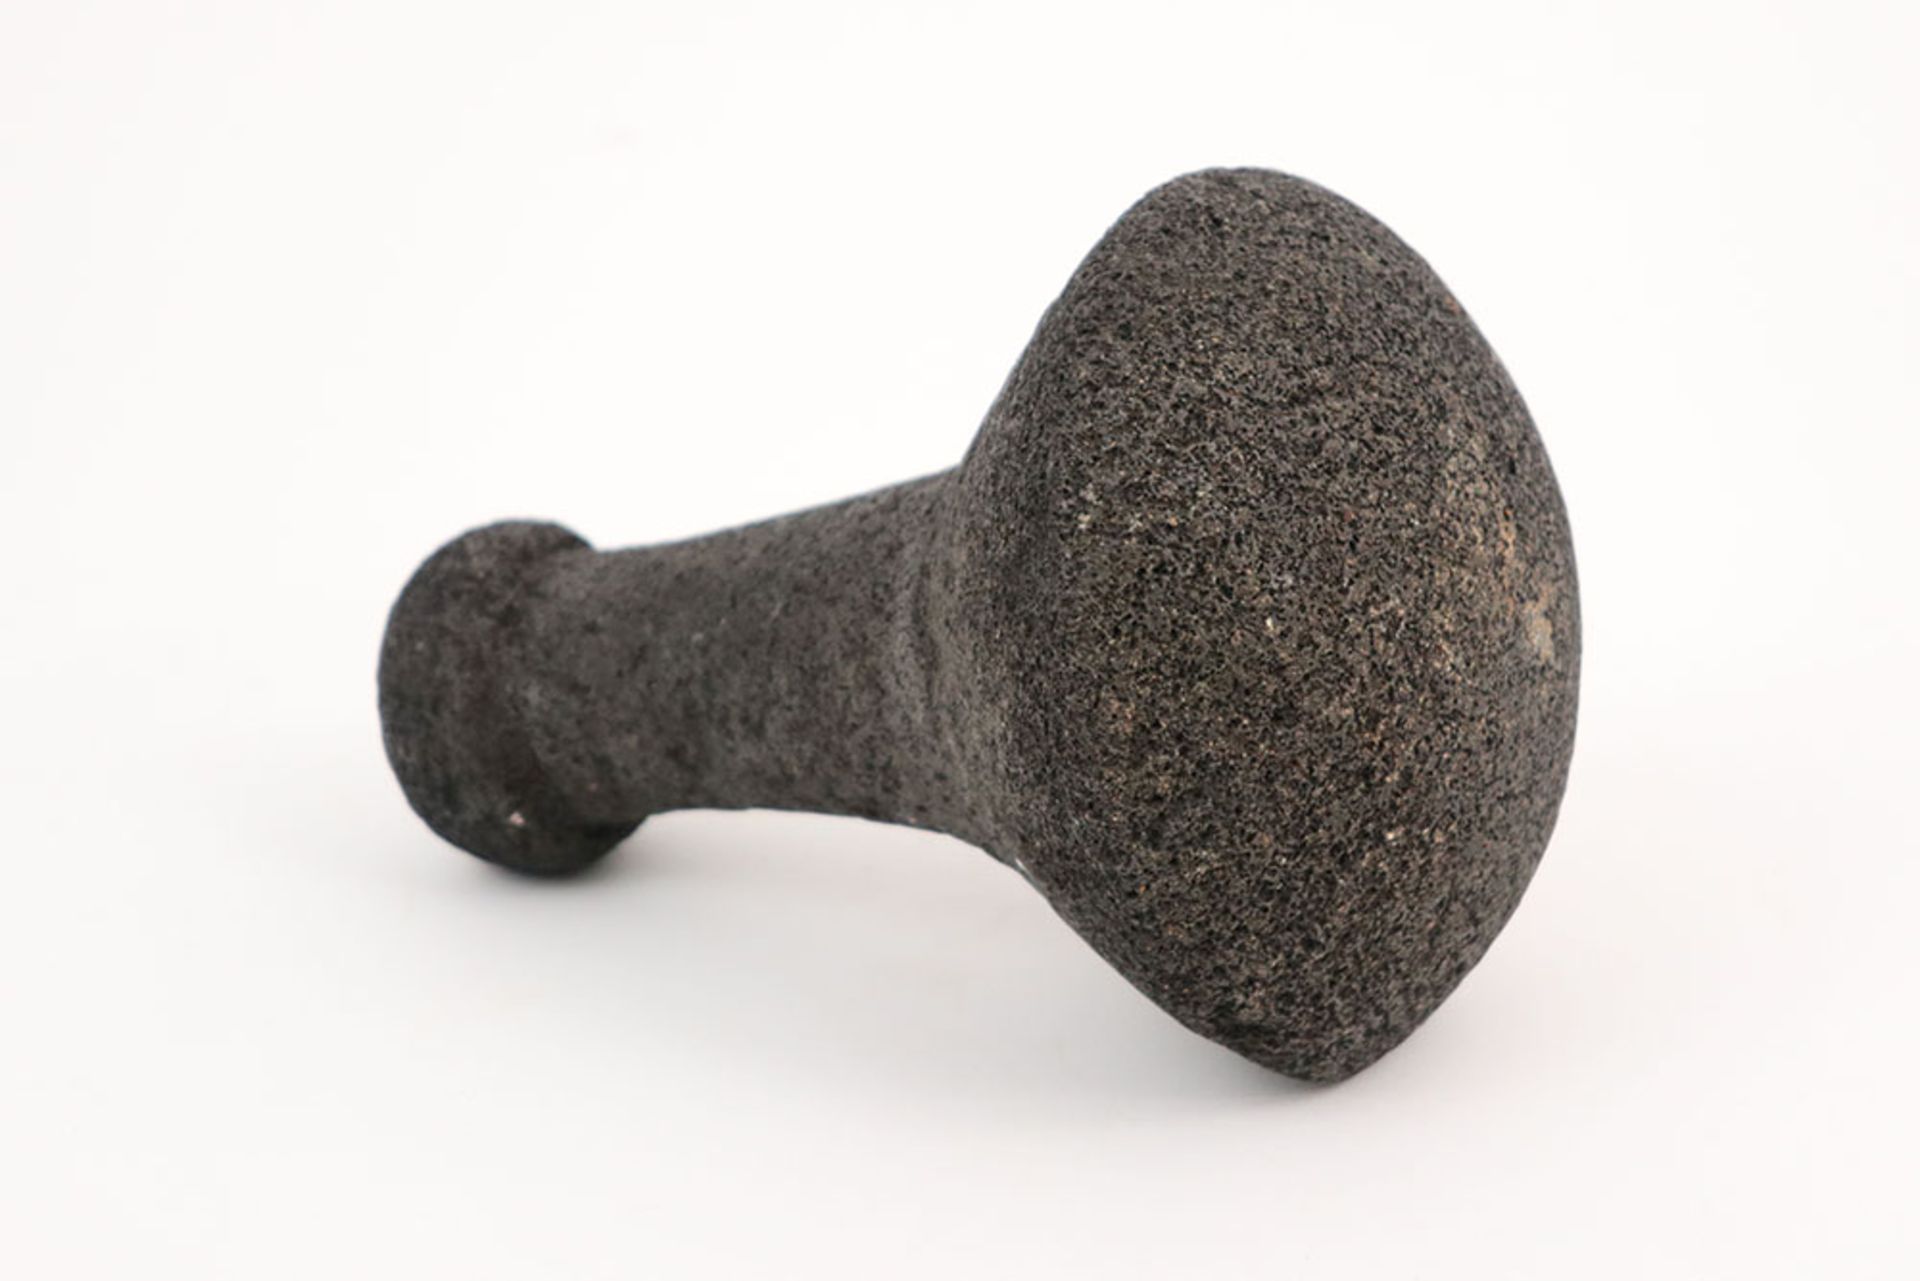 19th Cent. Polynesian "Poi" food pounder in grey basalt prov : bought at the Michel Thieme galery in - Image 3 of 3